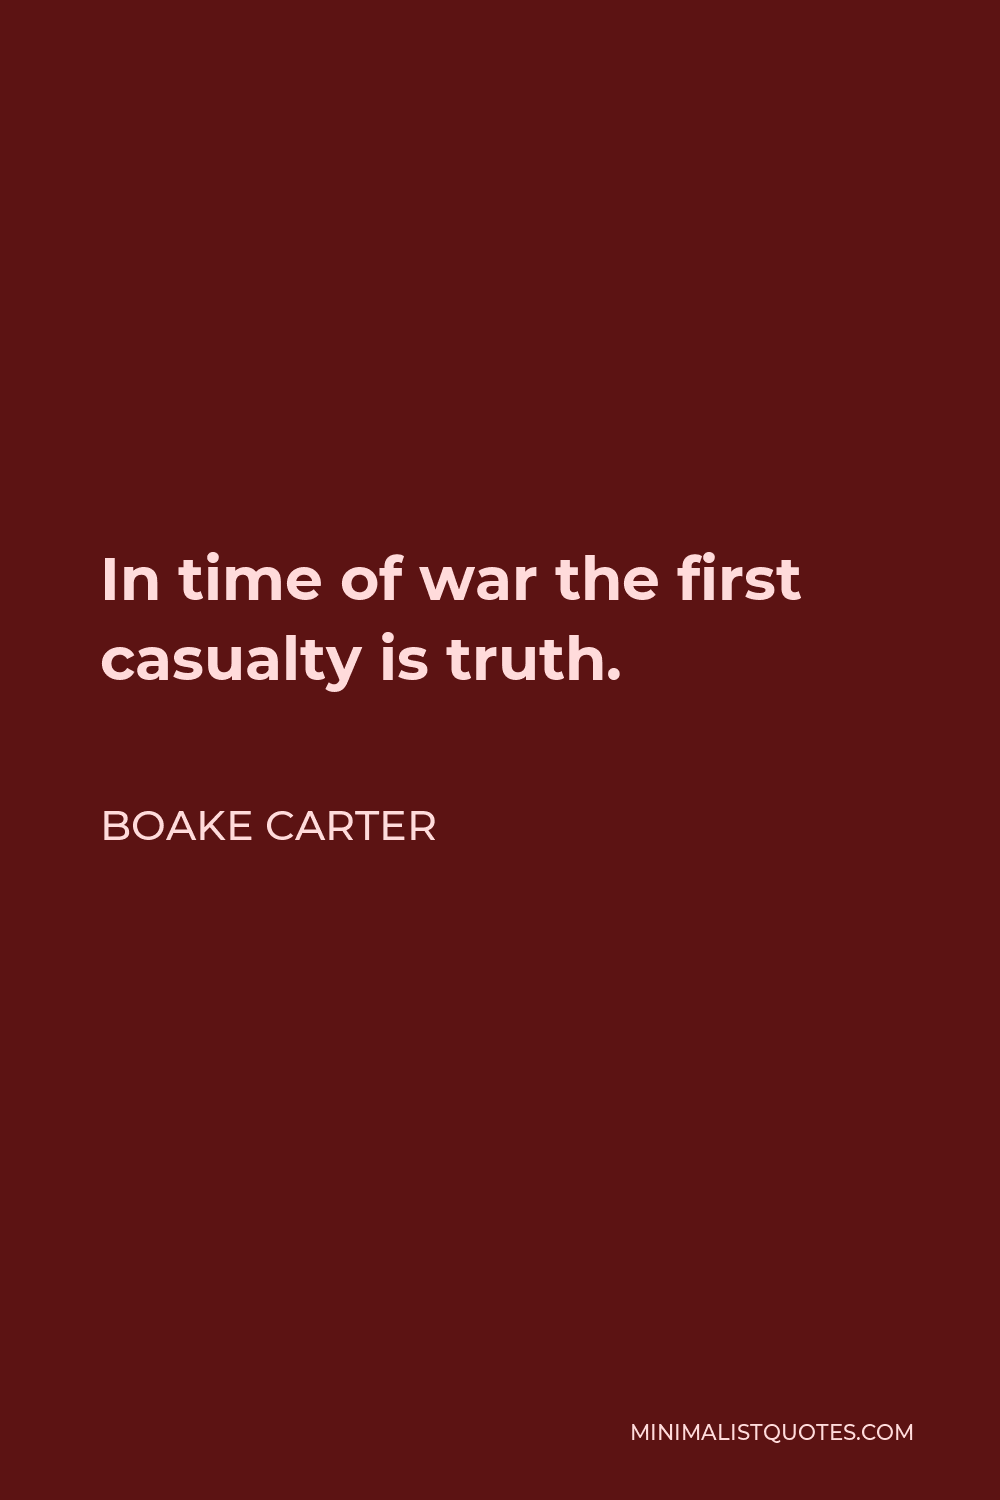 Boake Carter Quote - In time of war the first casualty is truth.